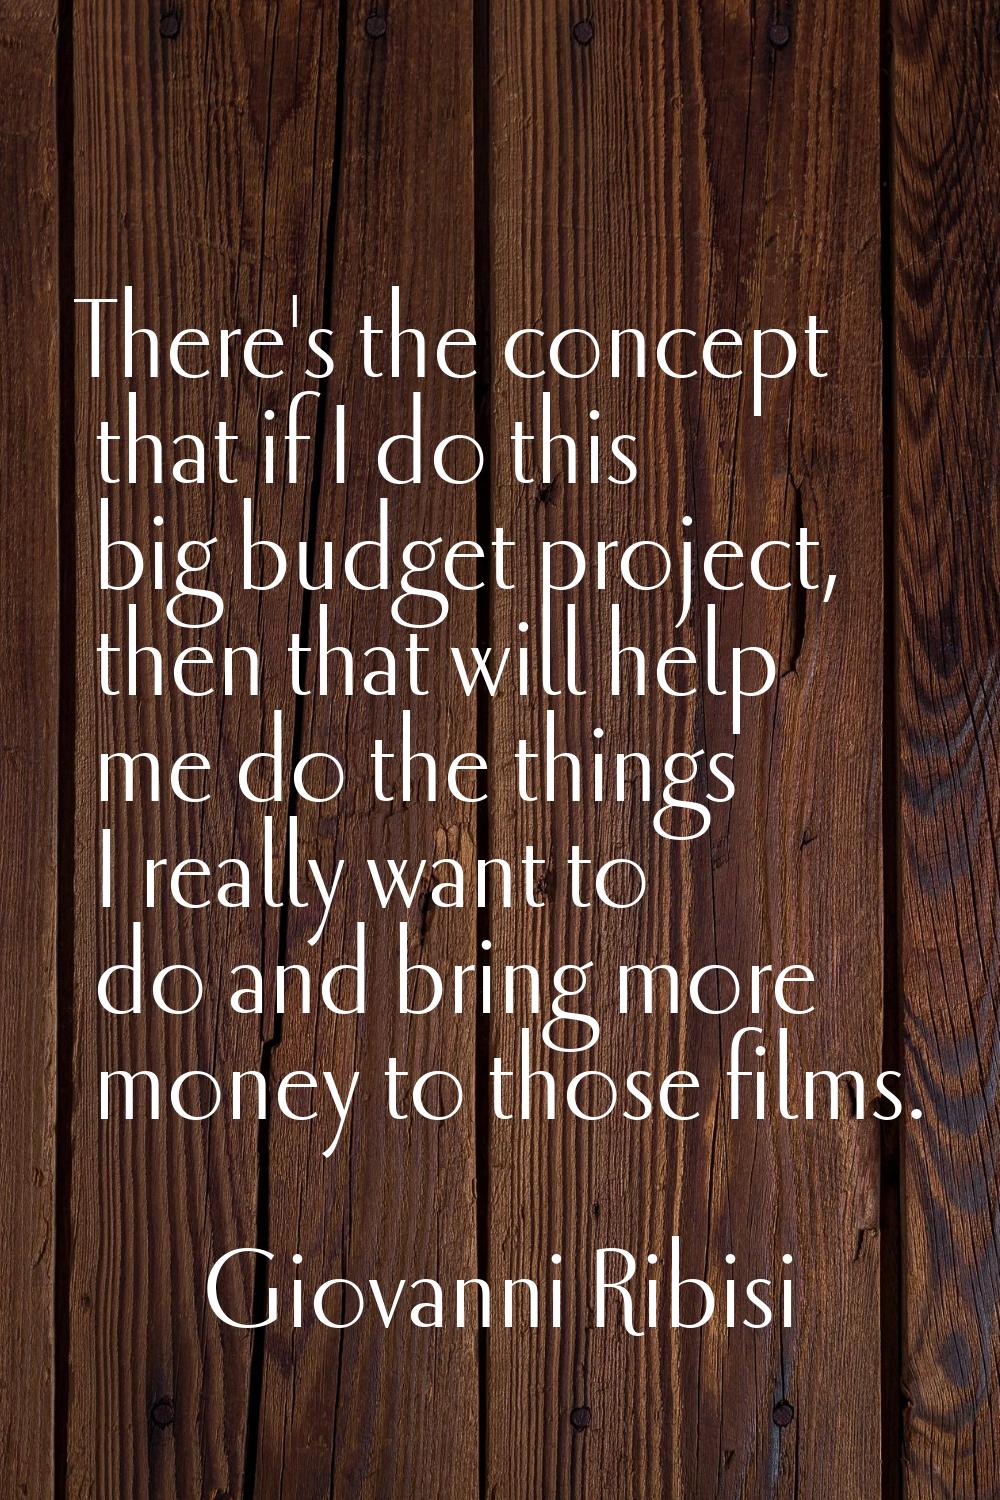 There's the concept that if I do this big budget project, then that will help me do the things I re